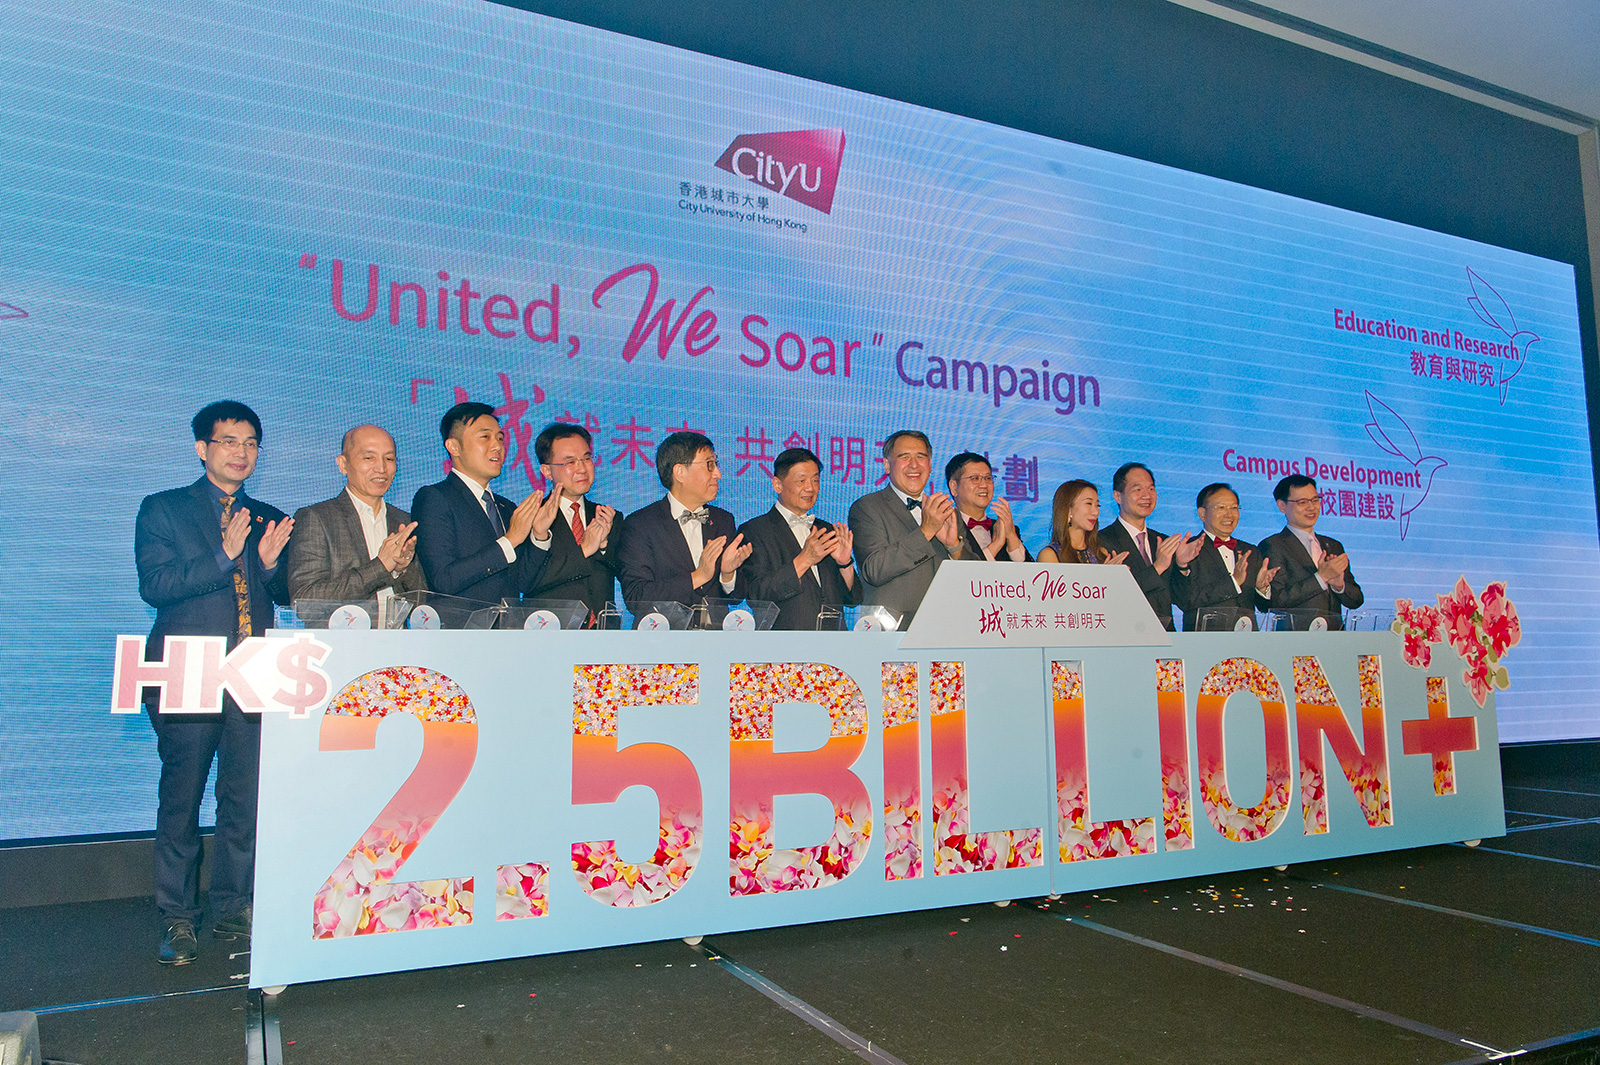 CityU’s “United, We Soar” fundraising campaign reaching target well ahead of schedule.